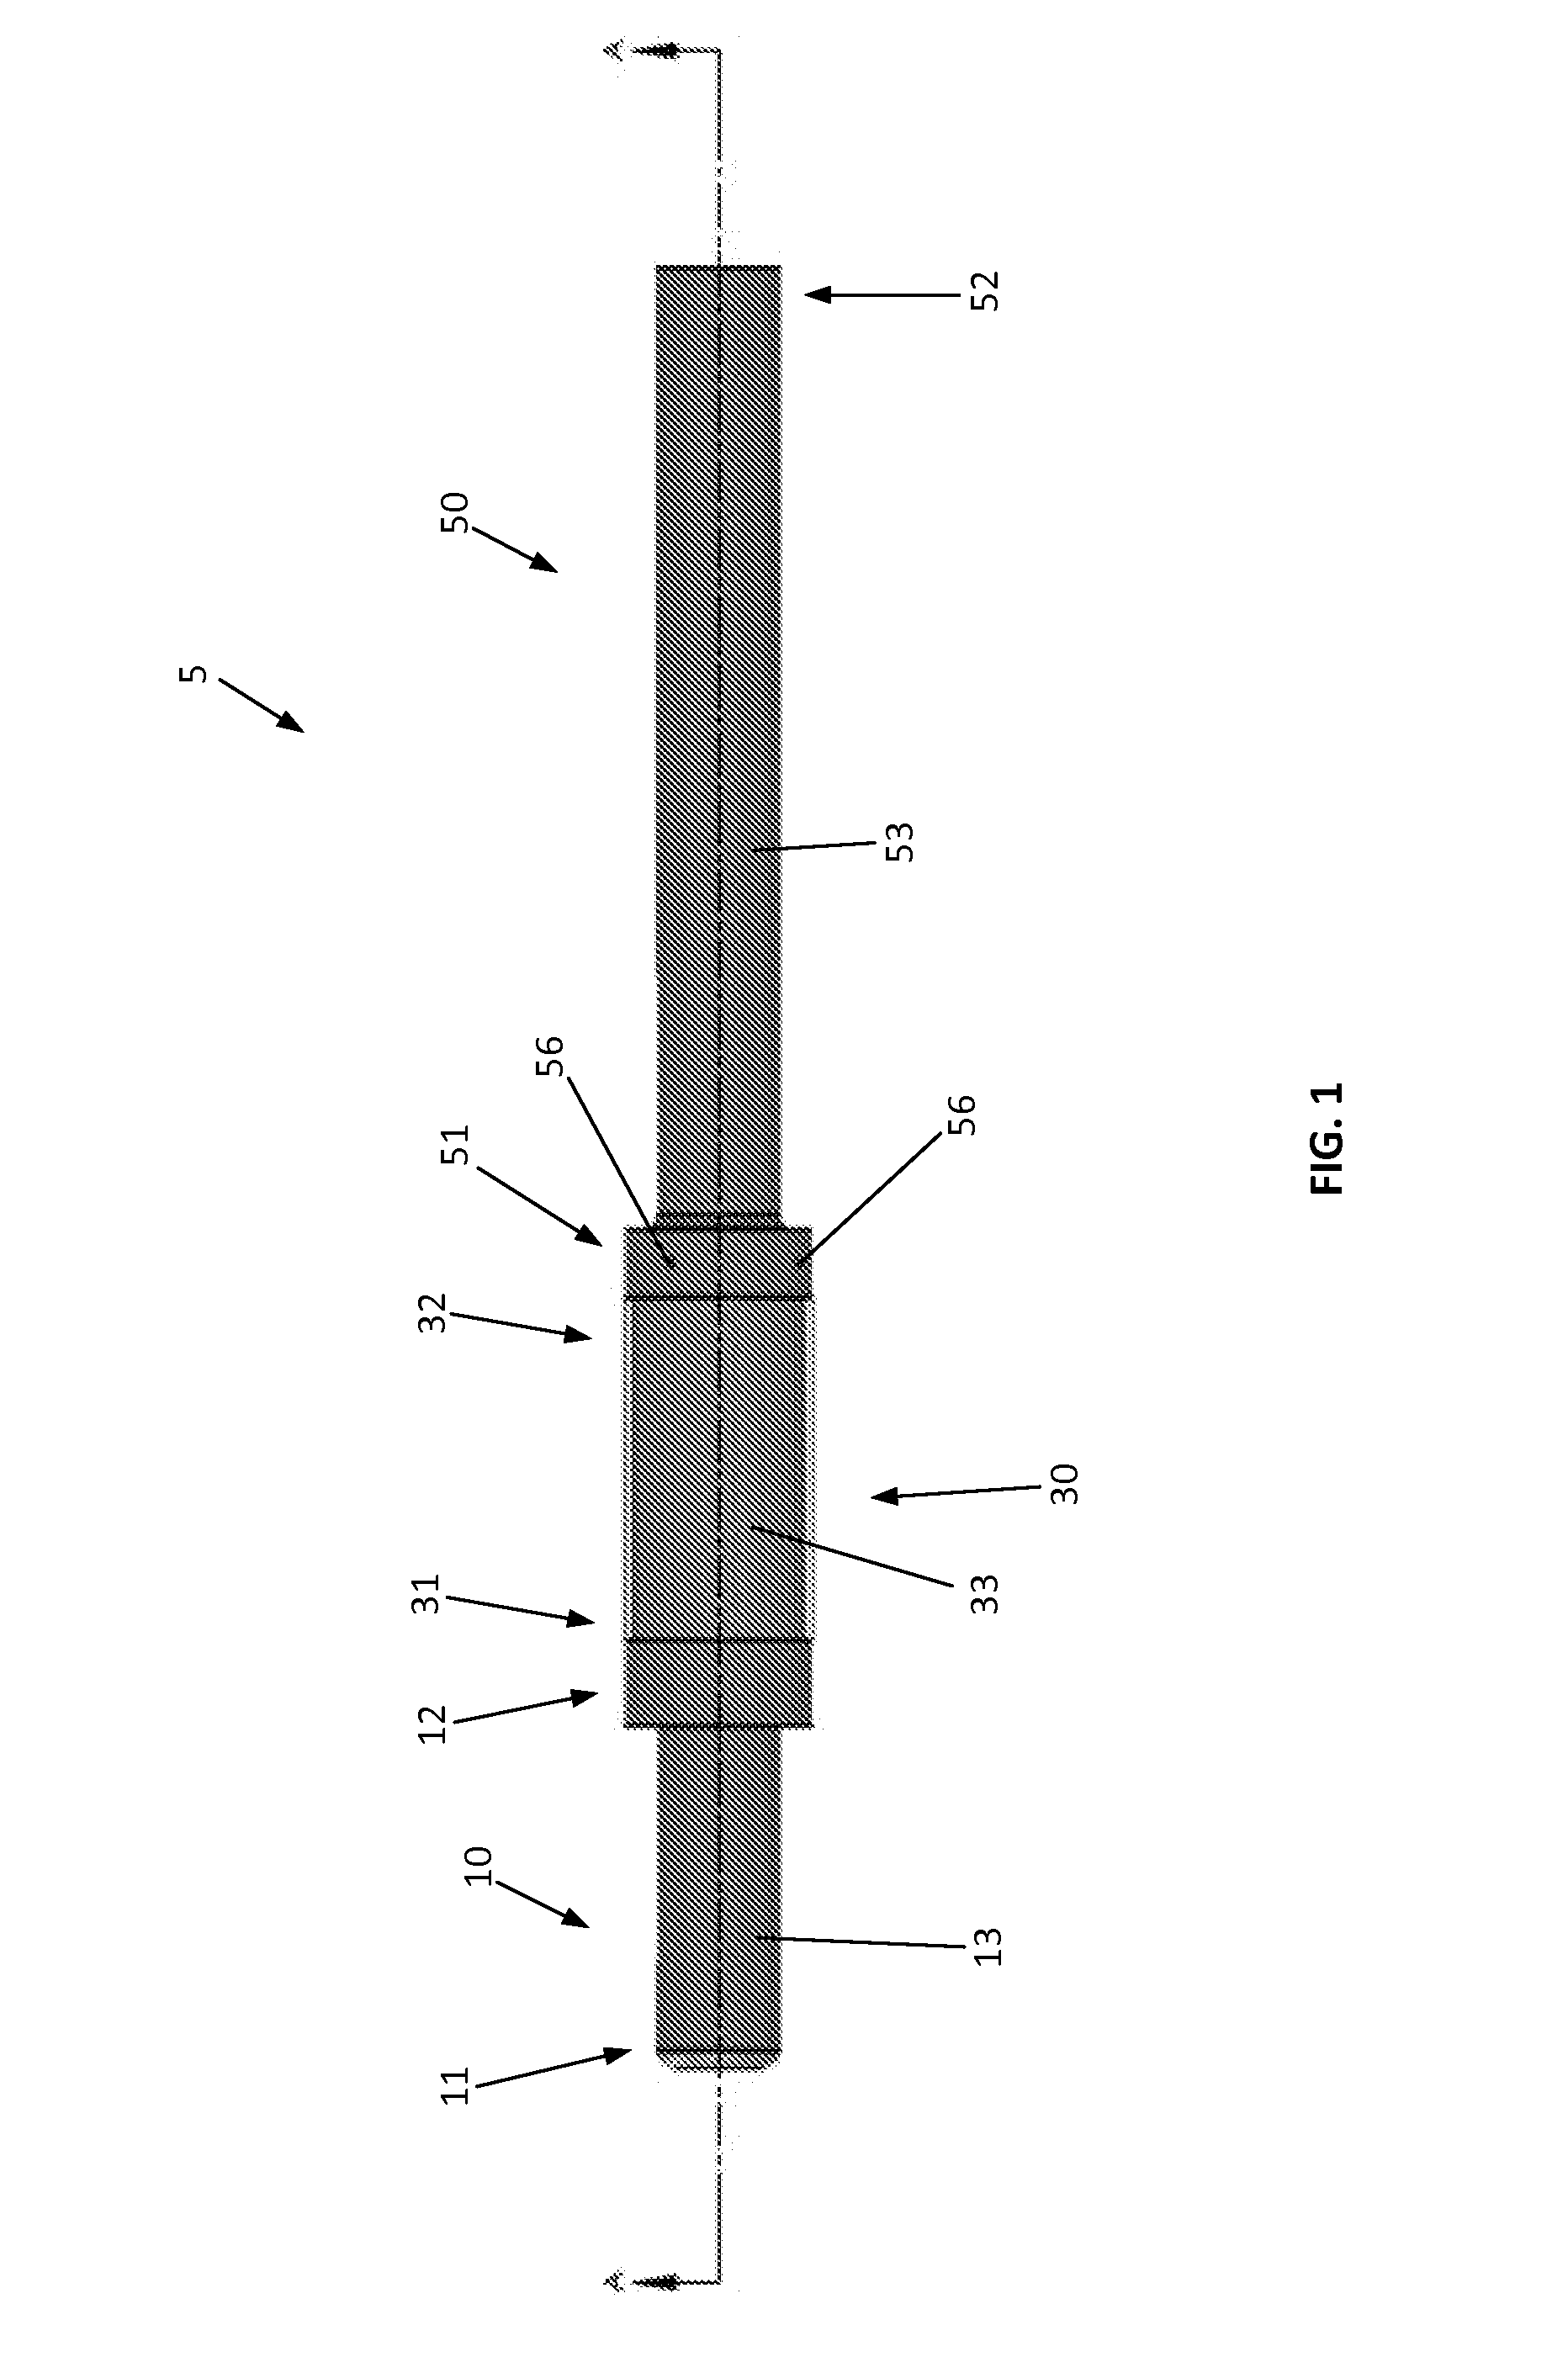 Electronic smoking article including a heating apparatus implementing a solid aerosol generating source, and associated apparatus and method